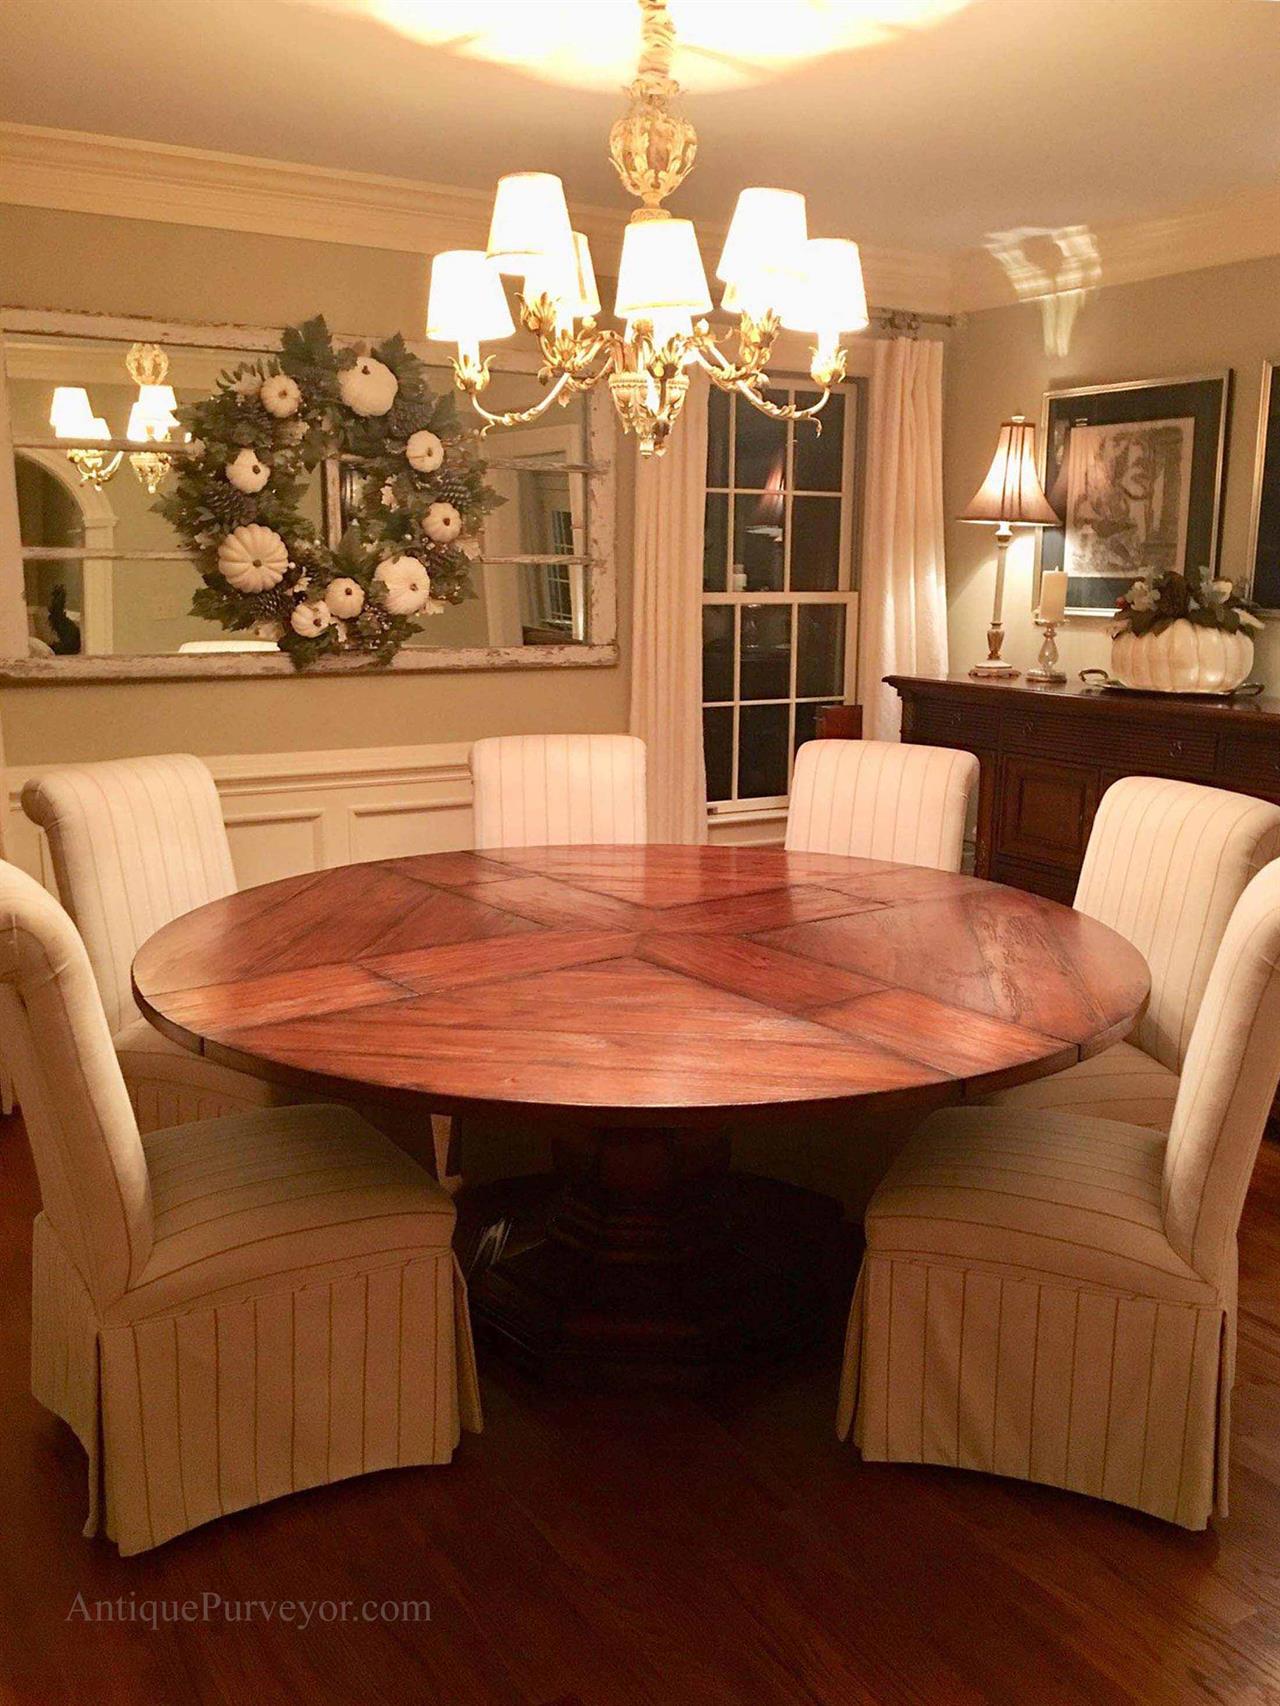 59 to 74 inch Round Solid Walnut Country Style Dining Table